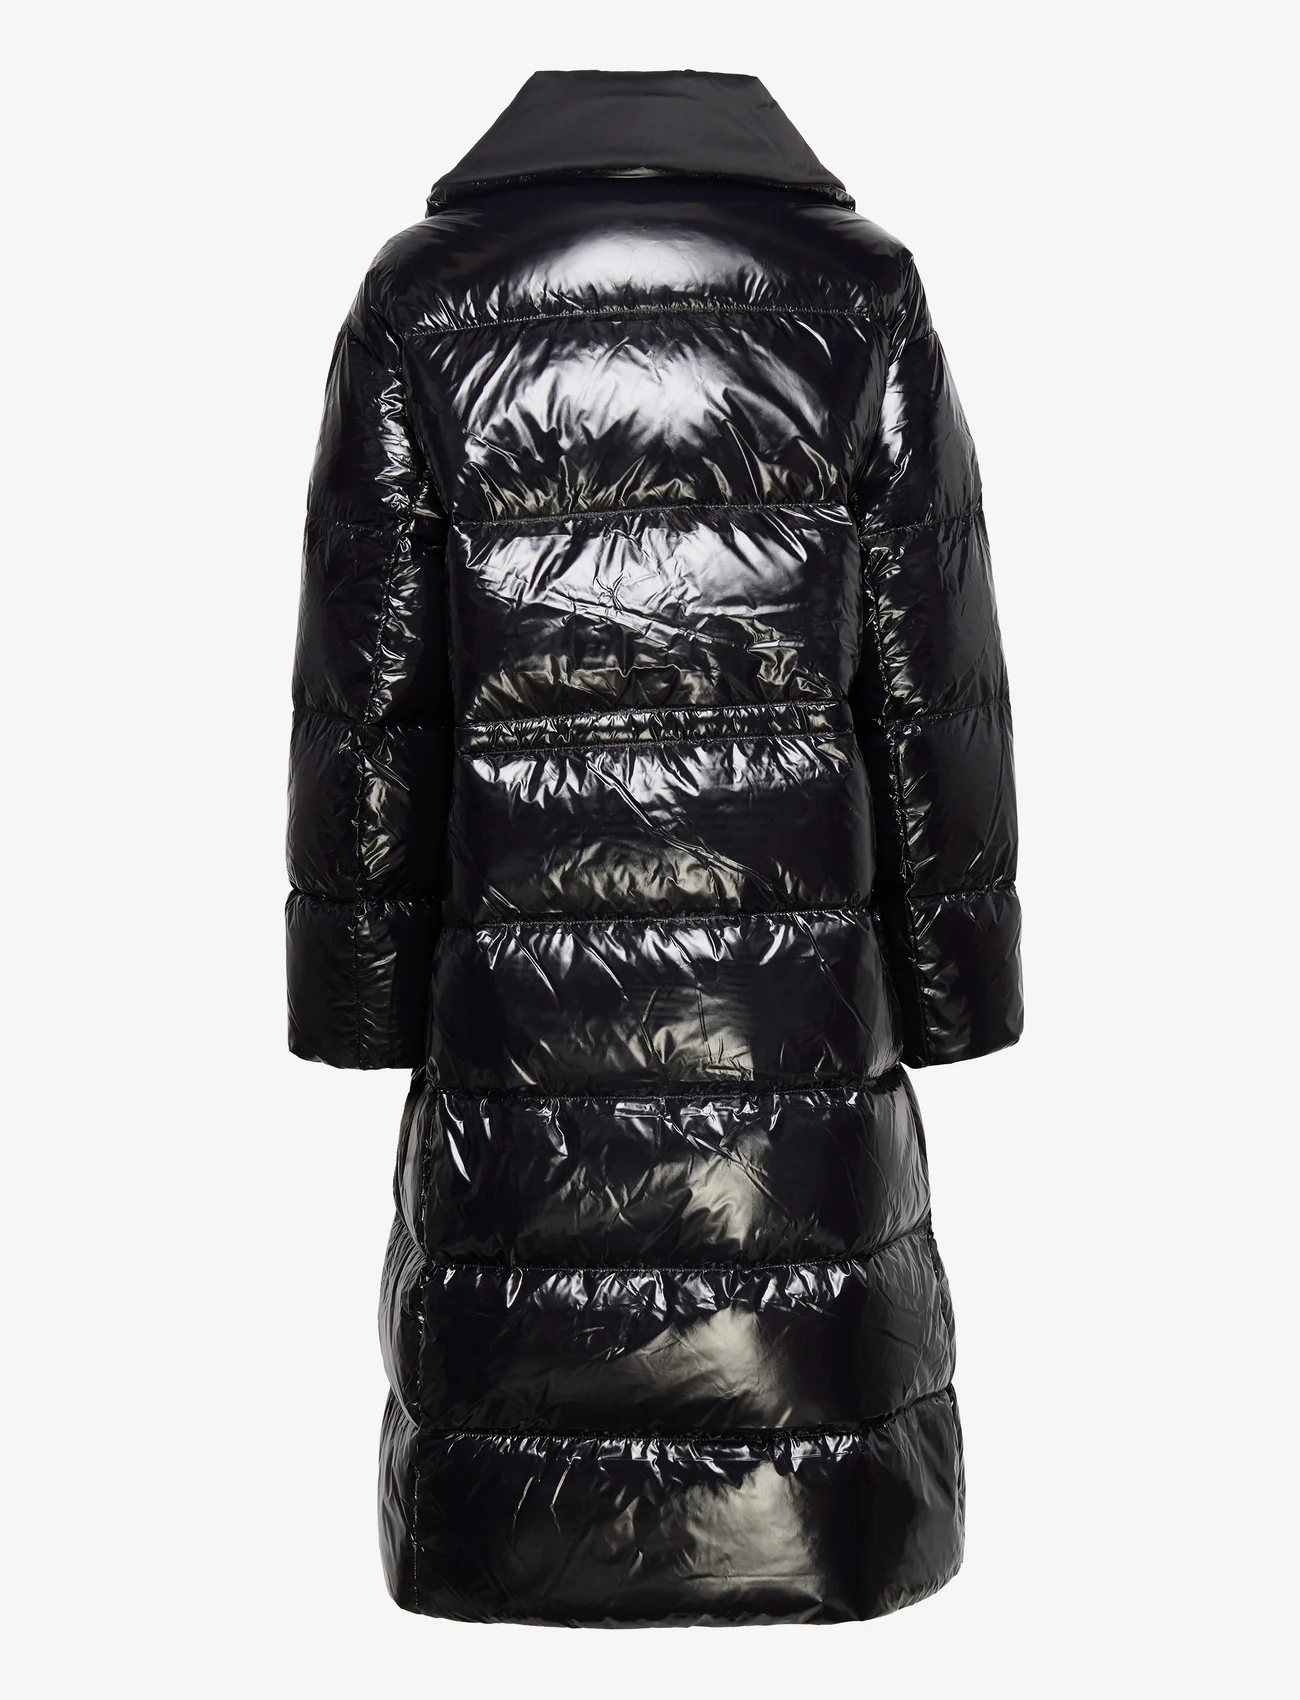 Calvin Klein High Shine Padded Puffer Coat  €. Buy Padded Coats  from Calvin Klein online at . Fast delivery and easy returns